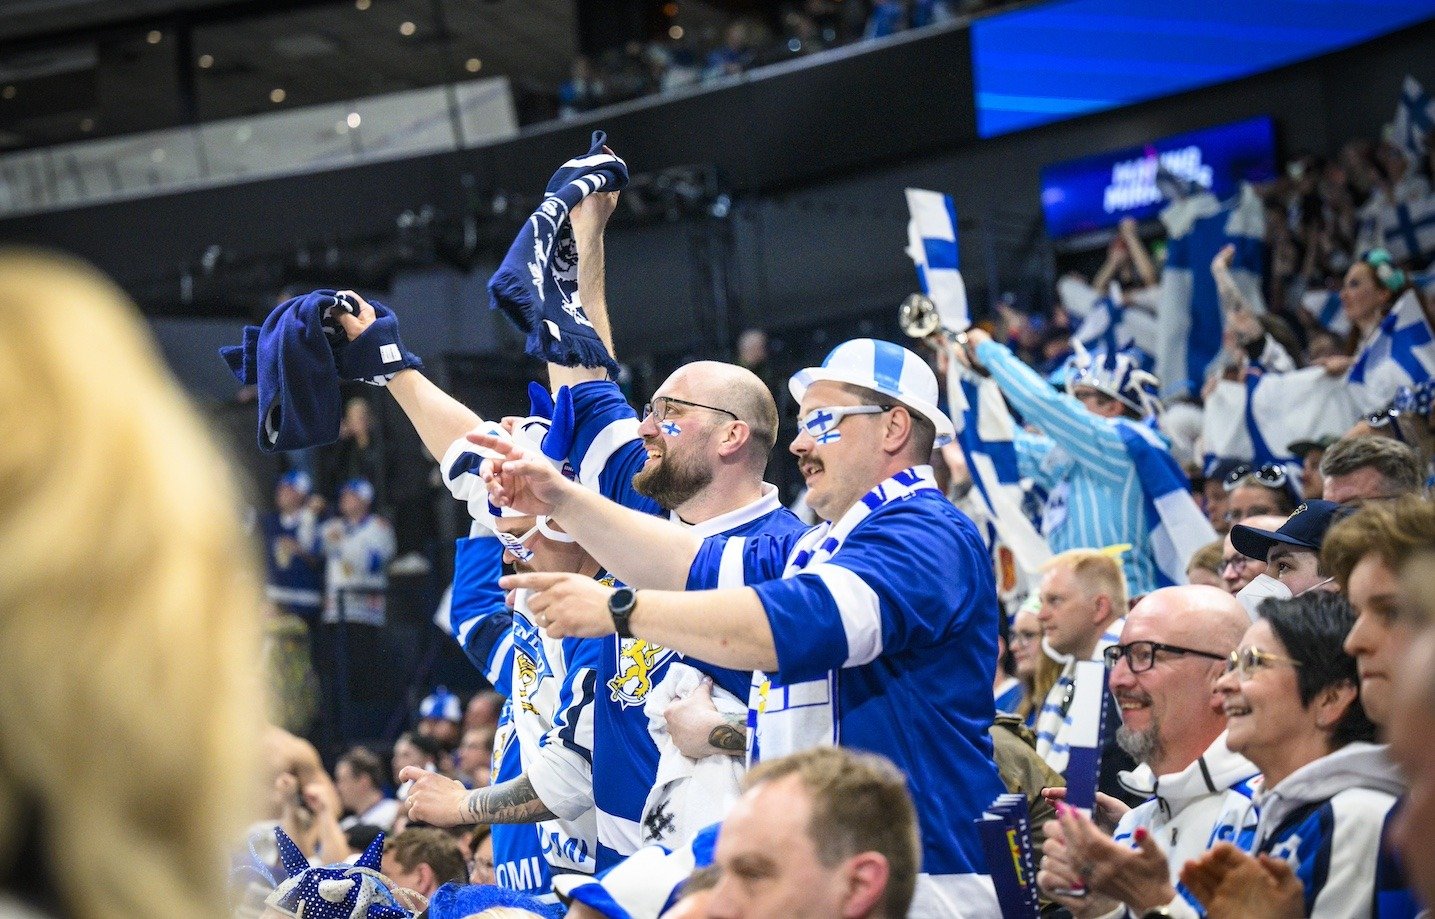 Finnish hockey fans cheering at a game